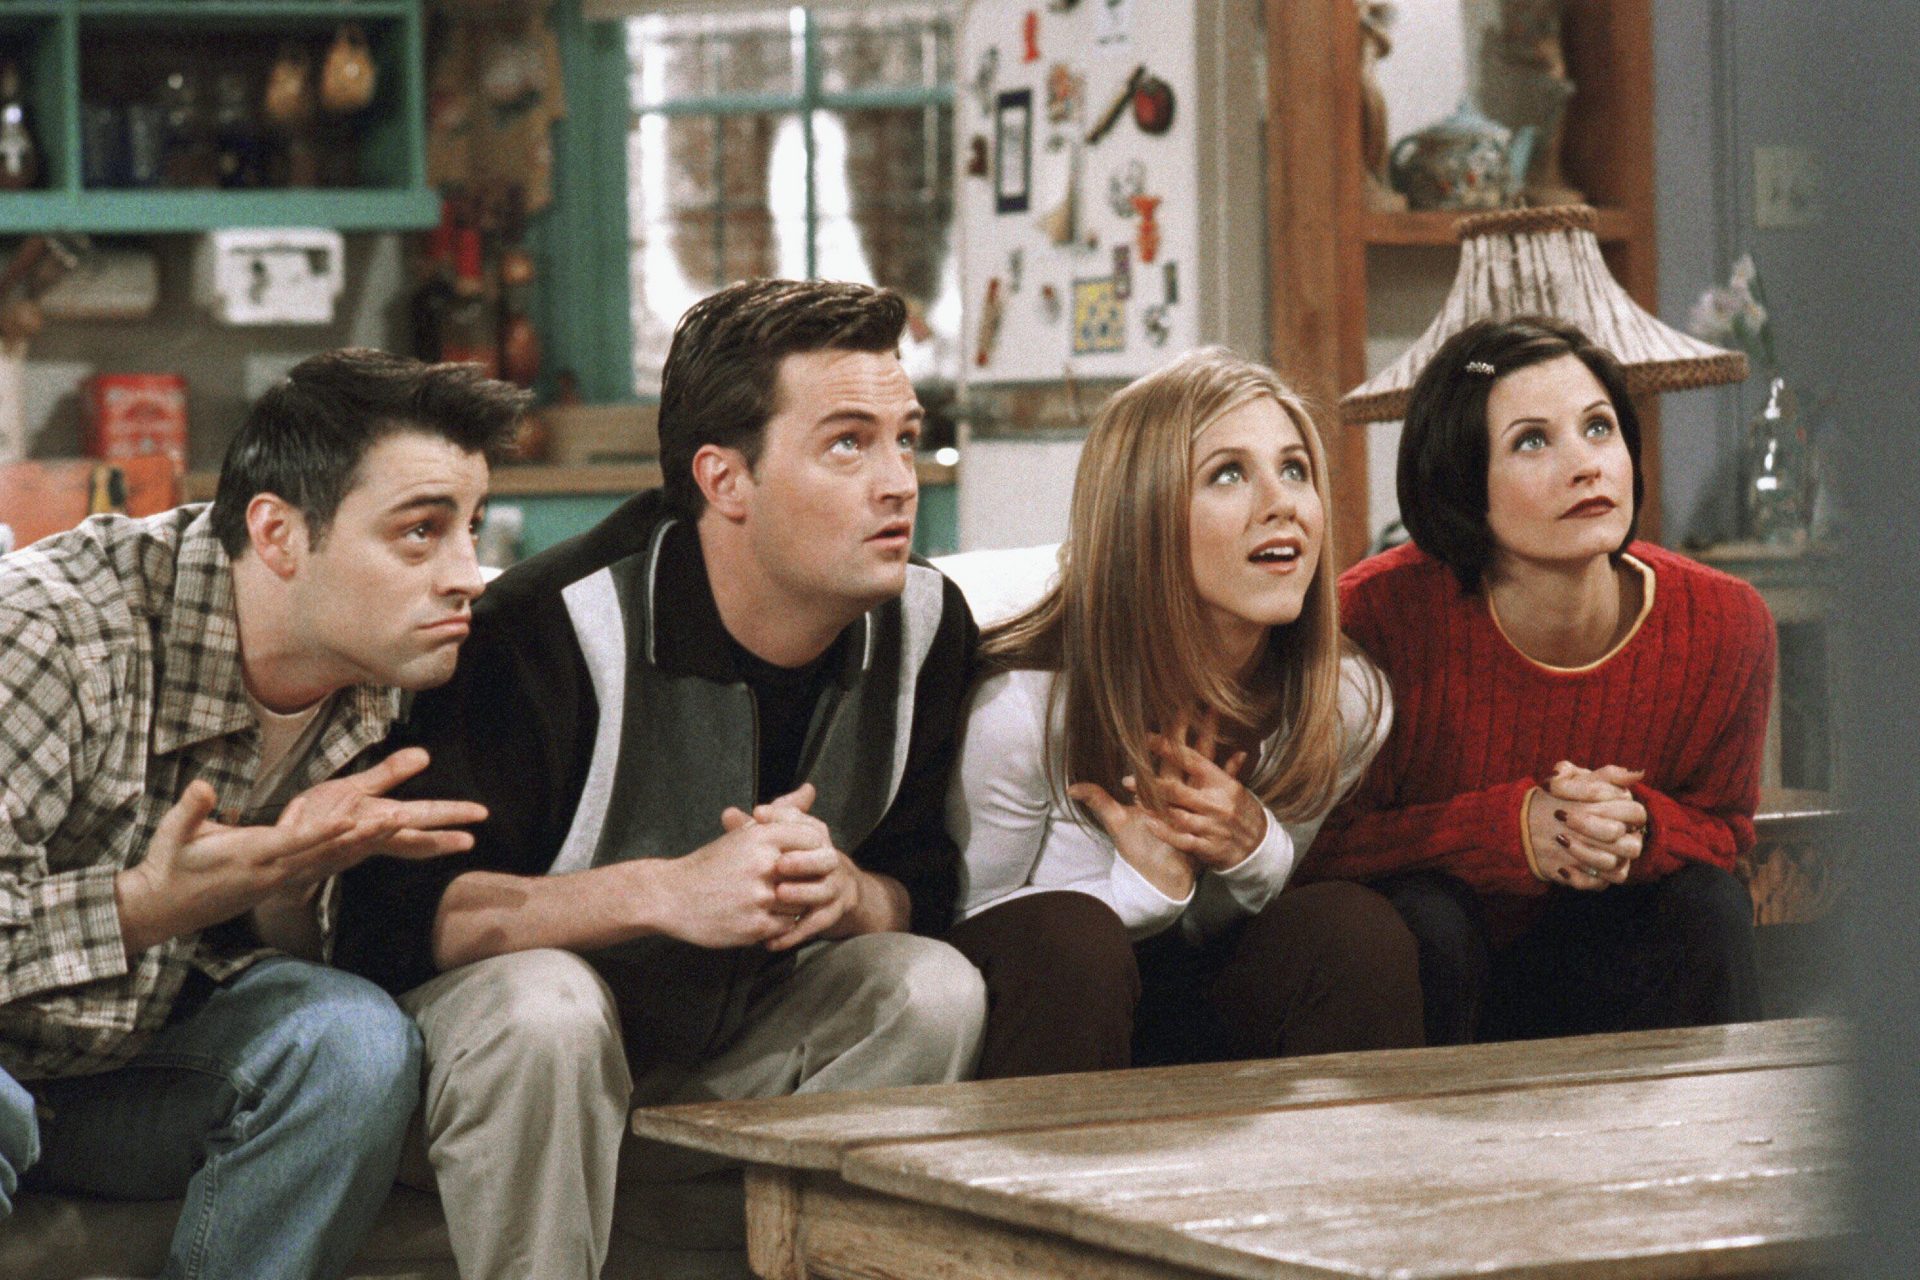 He auditioned for a role on ‘Friends’ and his life changed forever